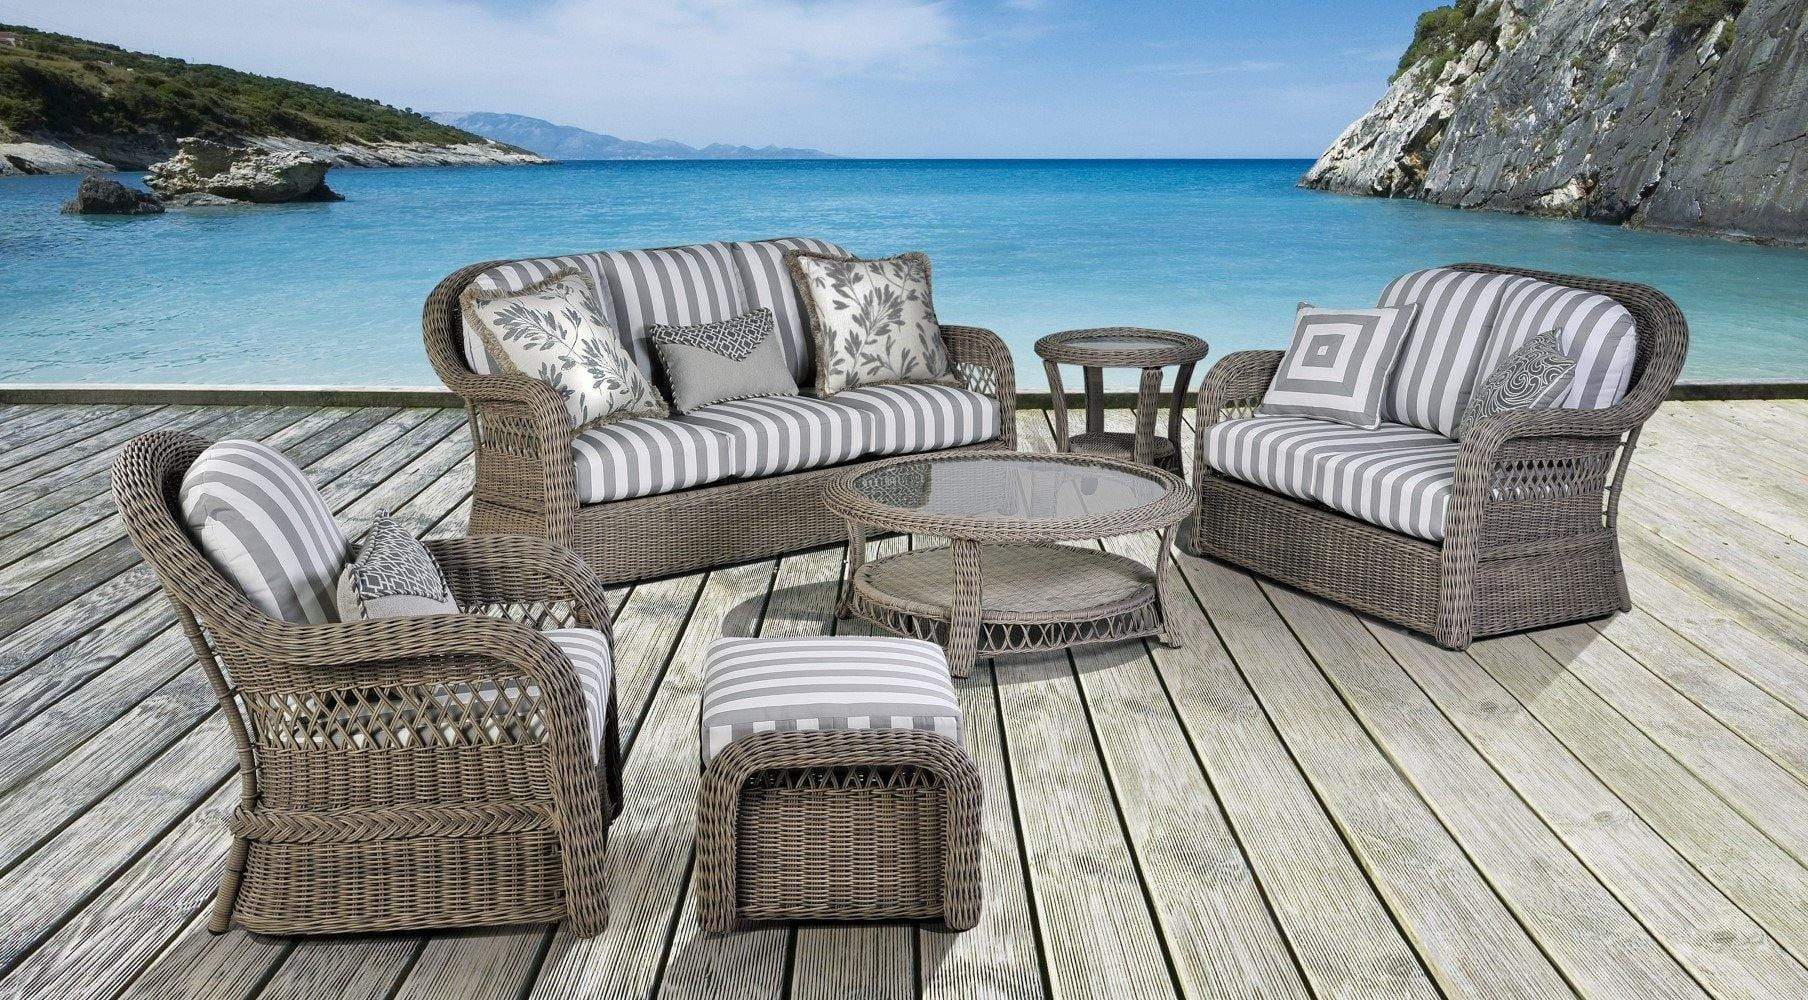 South Sea Outdoor Living Patio Furniture Arcadia Coffee Table by South Sea Outdoor Living - 77344